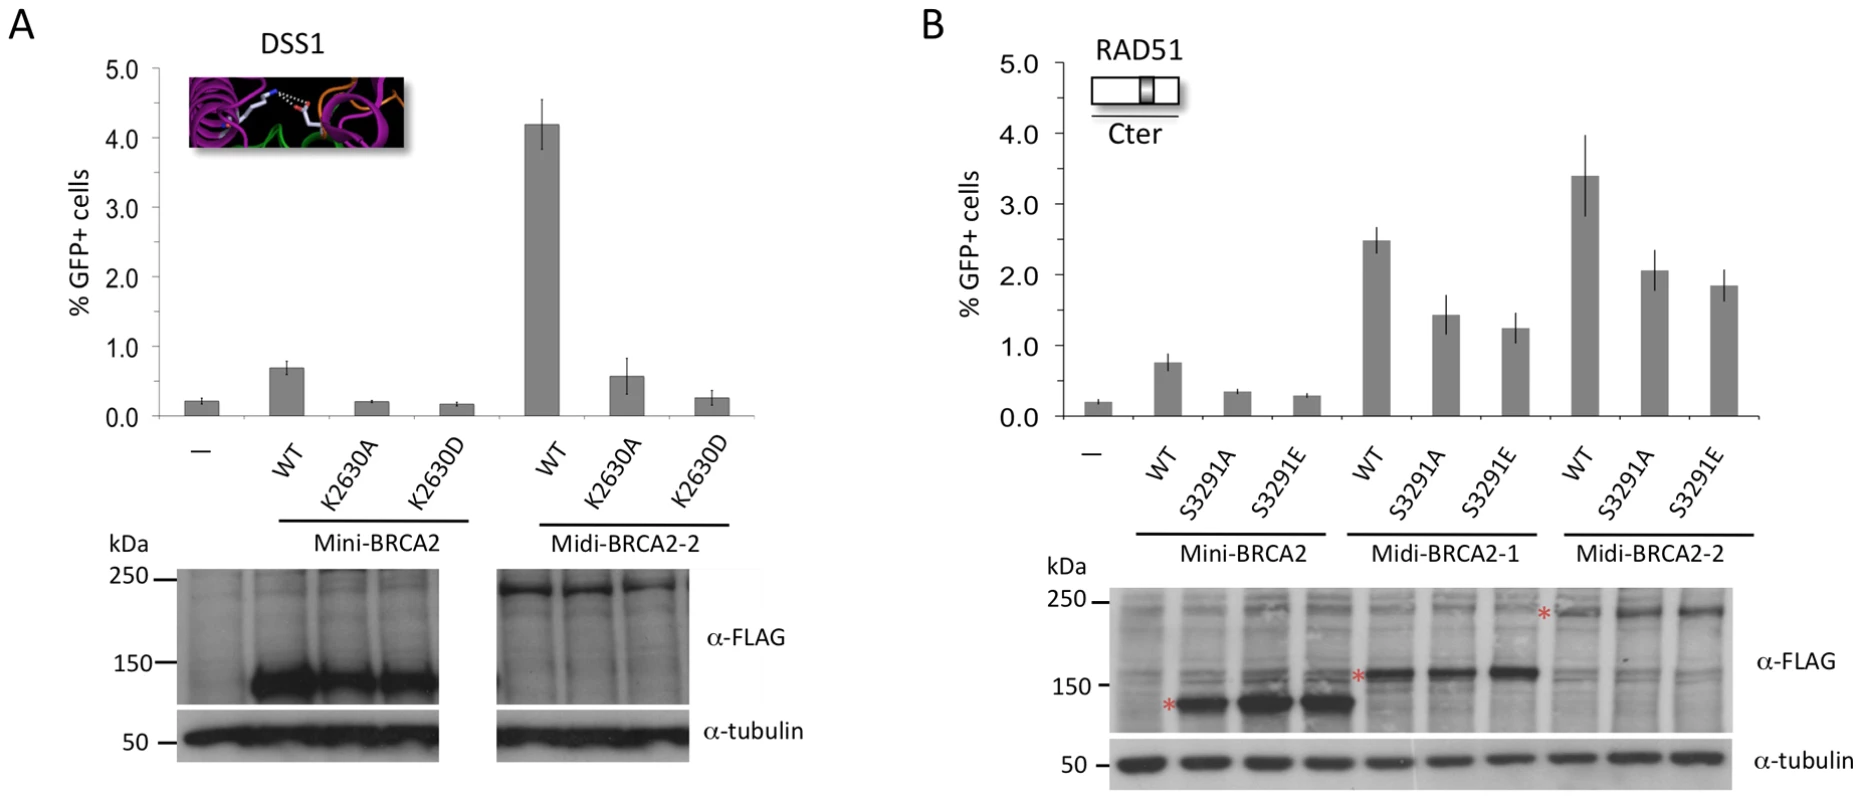 Interaction with PALB2 partially compensates for point mutations in the Cter that interfere with RAD51 binding, but cannot compensate for mutations that interfere with DSS1 binding.